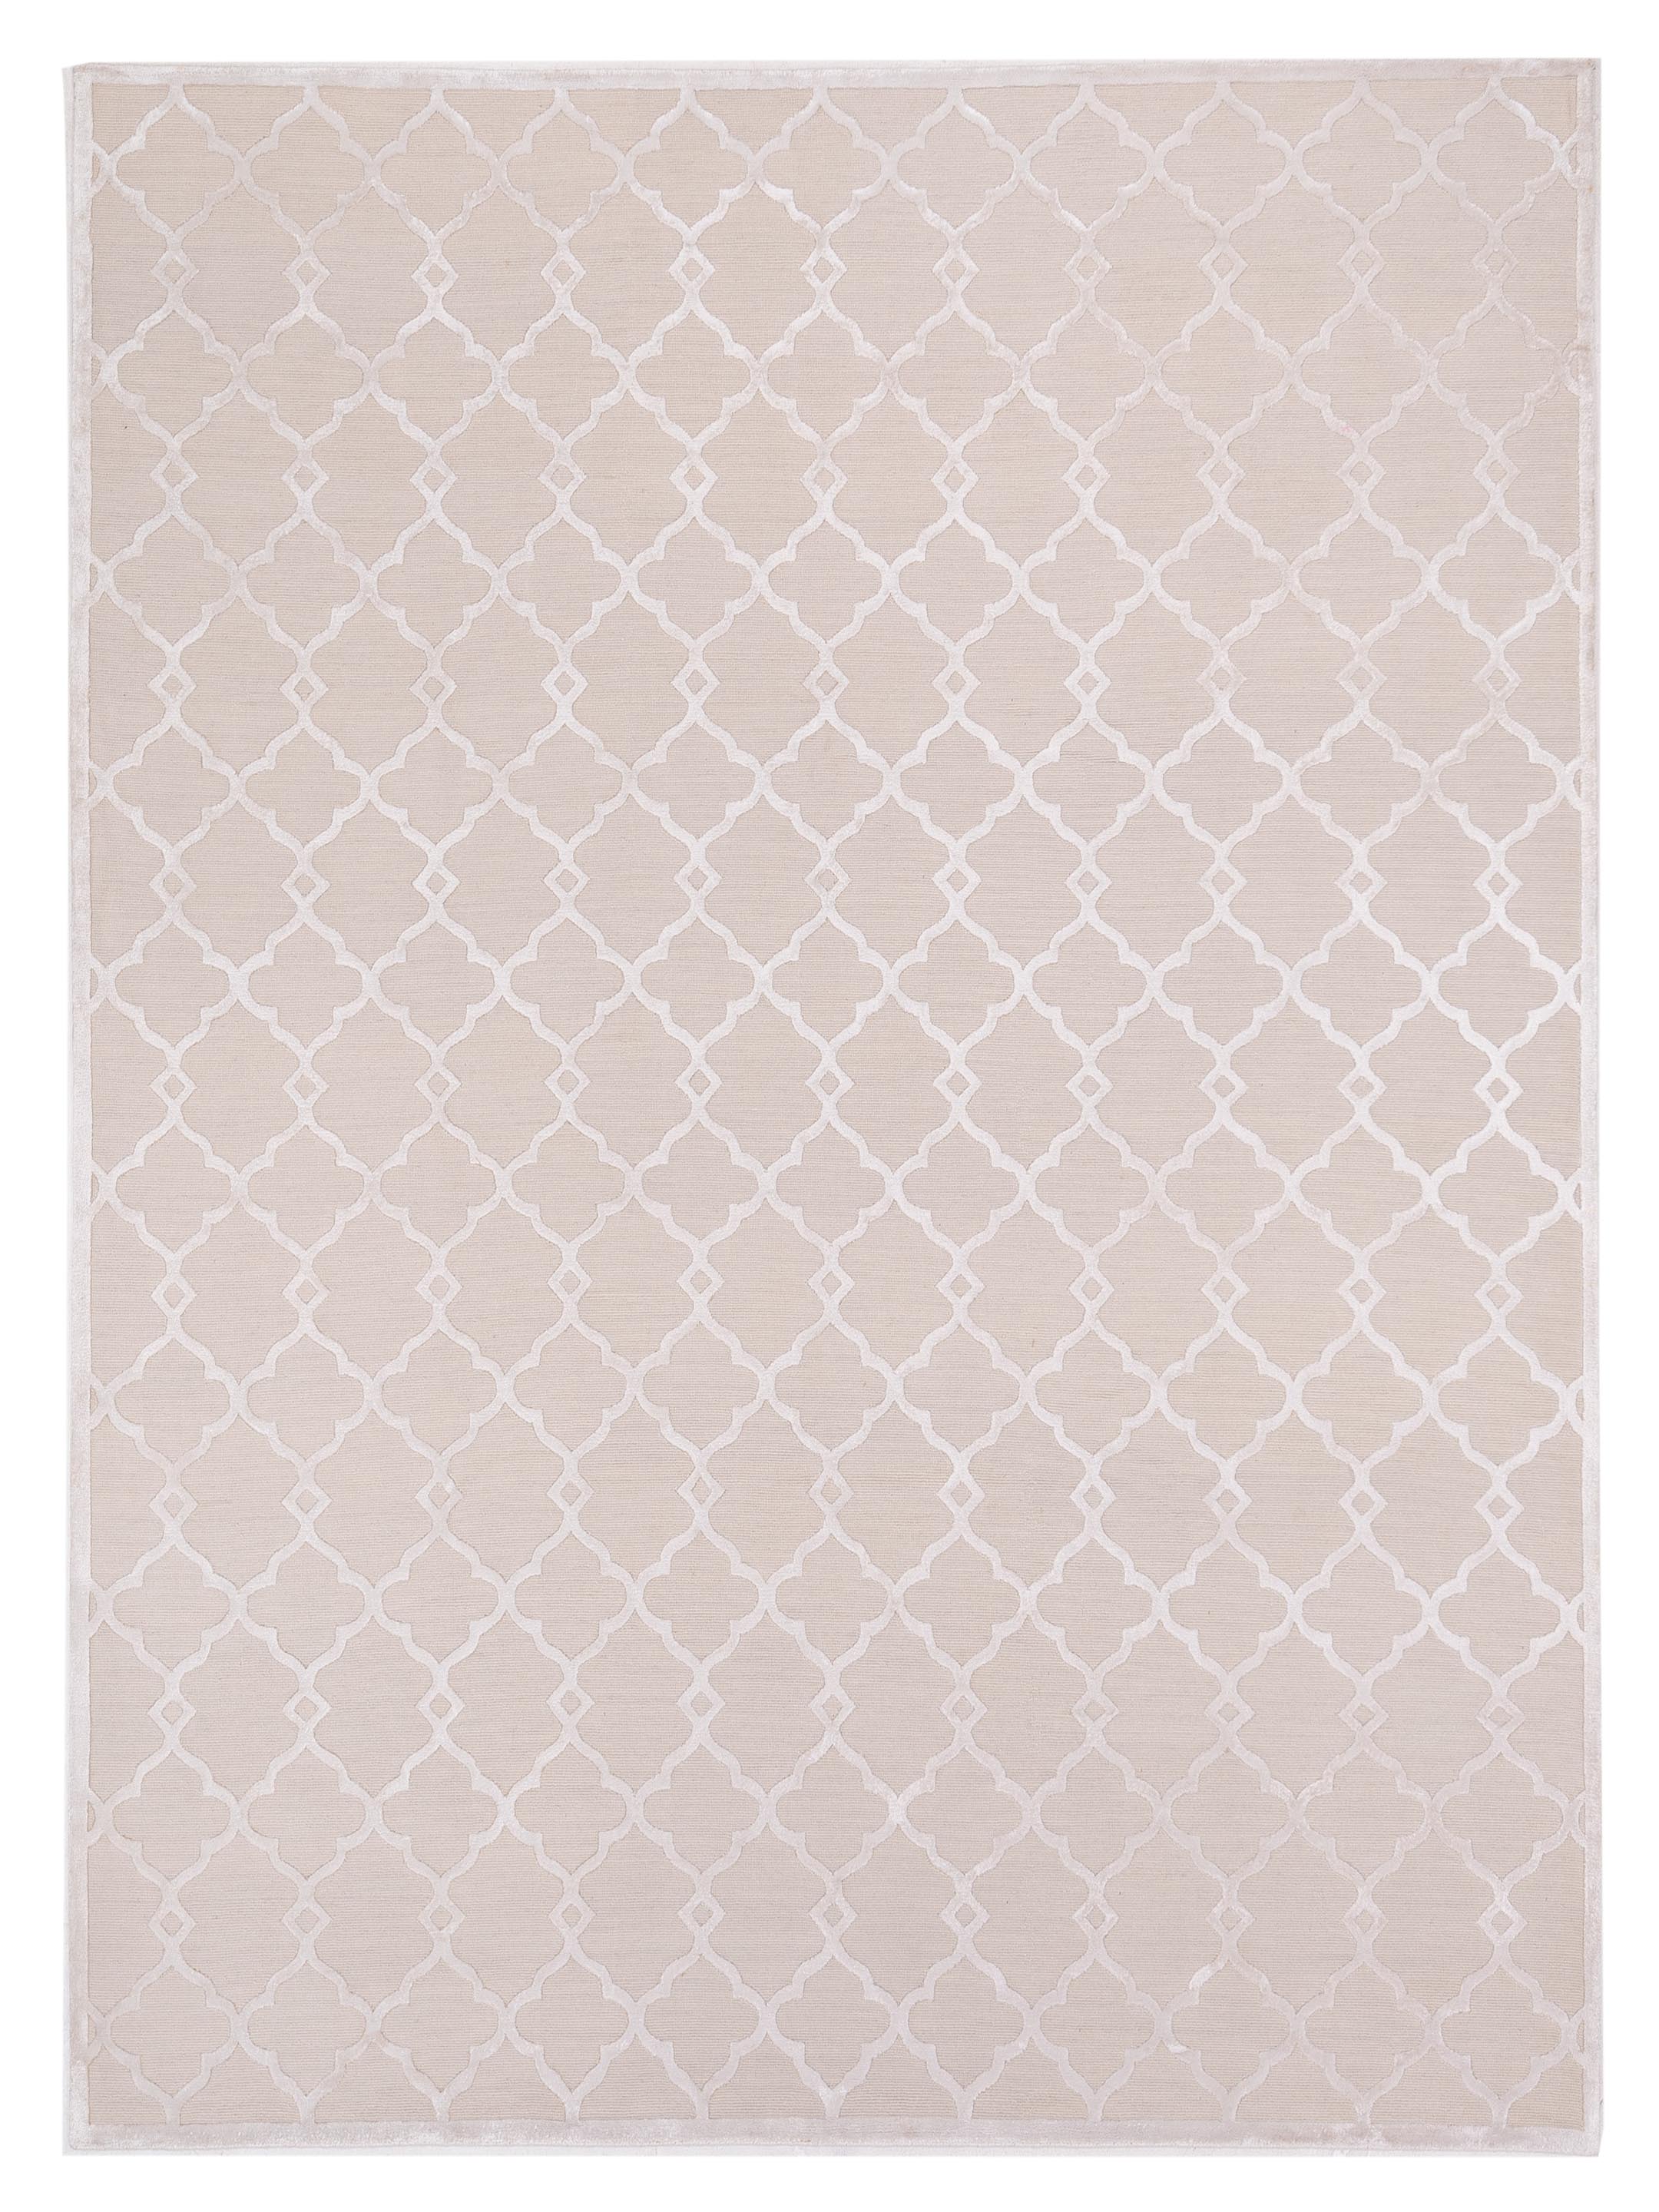 Sterling Contemporary Beige 8x10 Area Rug	